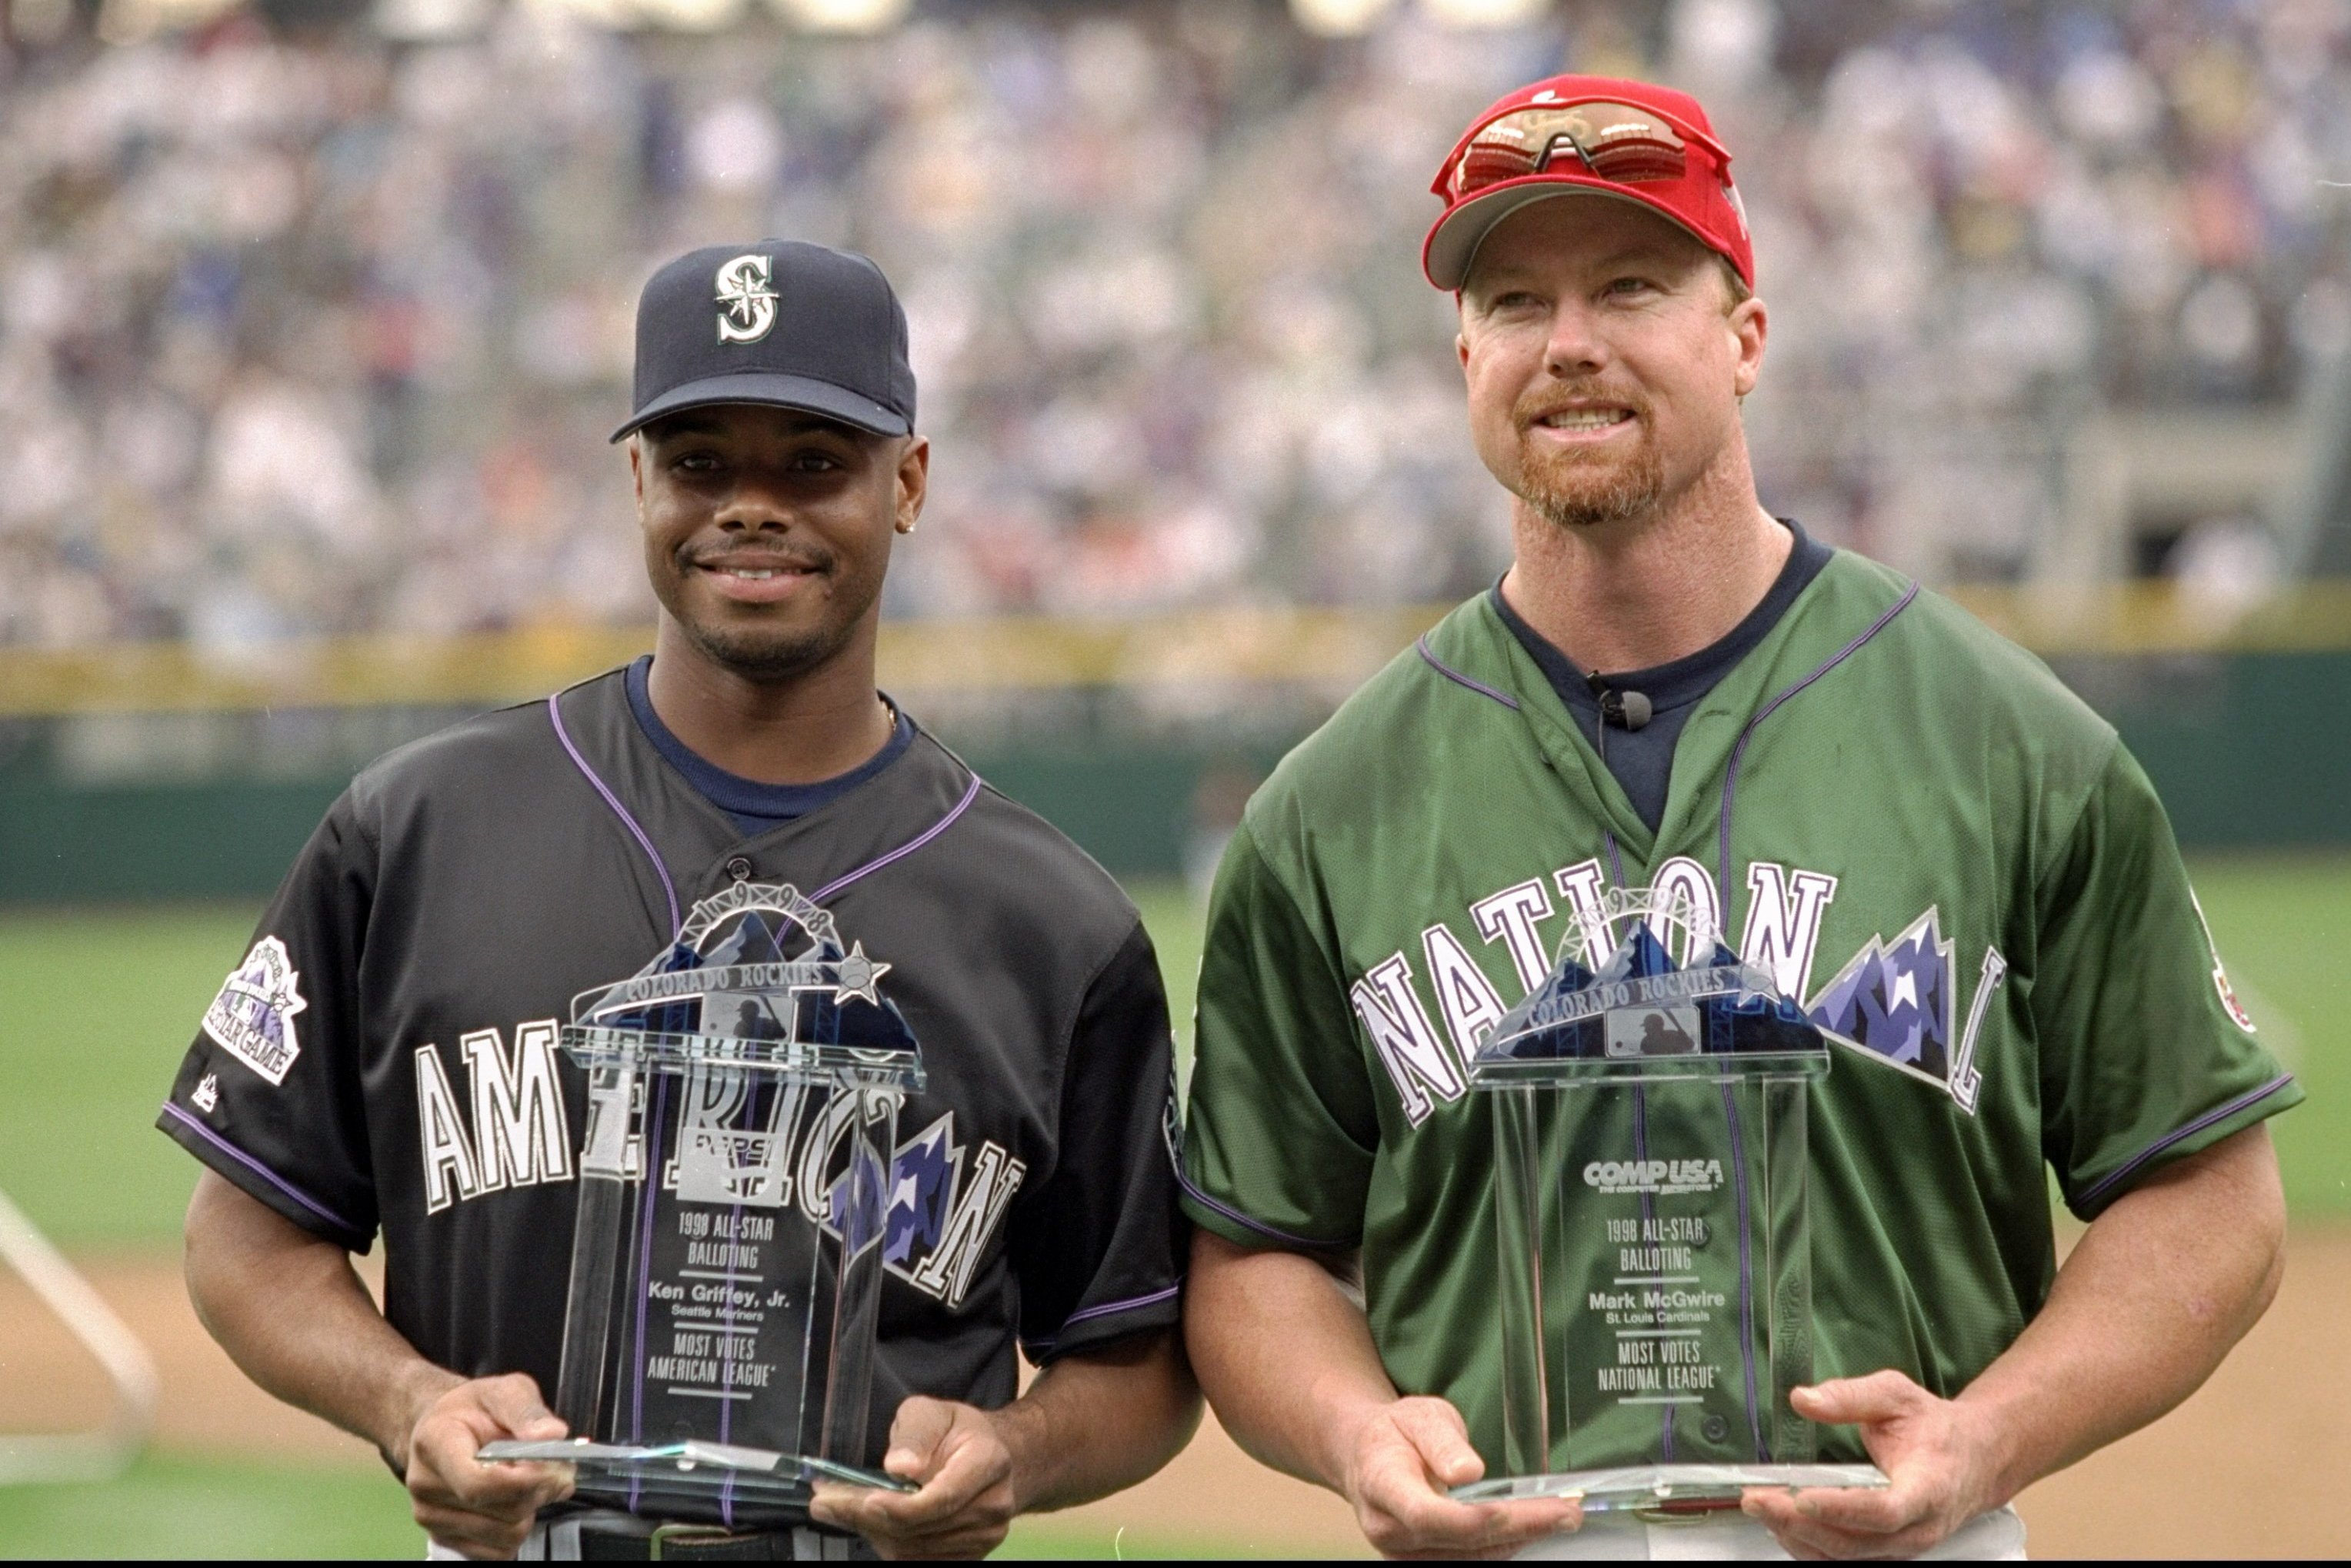 1998 Mariners Home Runs  The 1998 Mariners brought the power